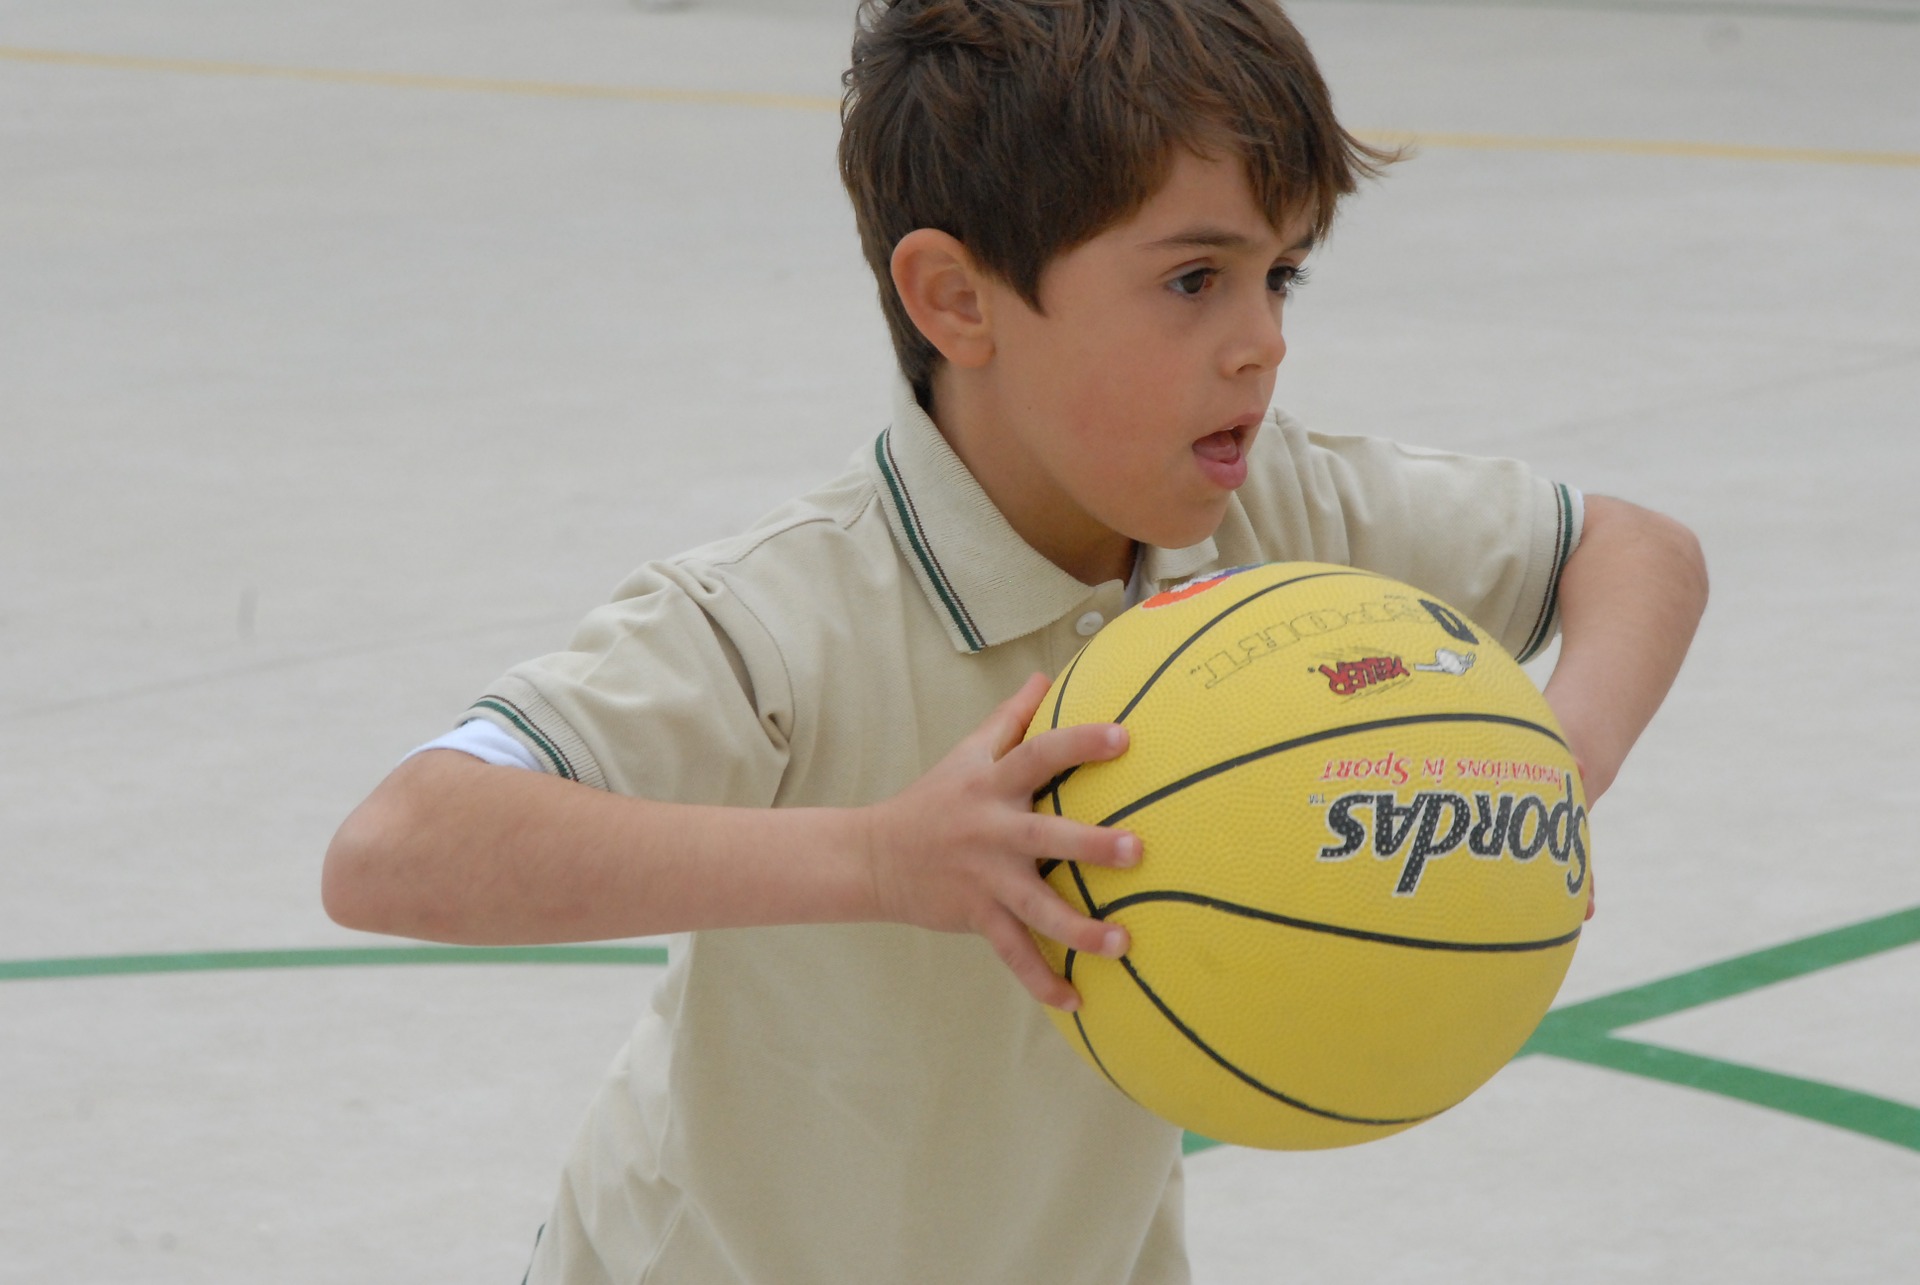 child with basketball, Image by Angel Salazar from Pixabay